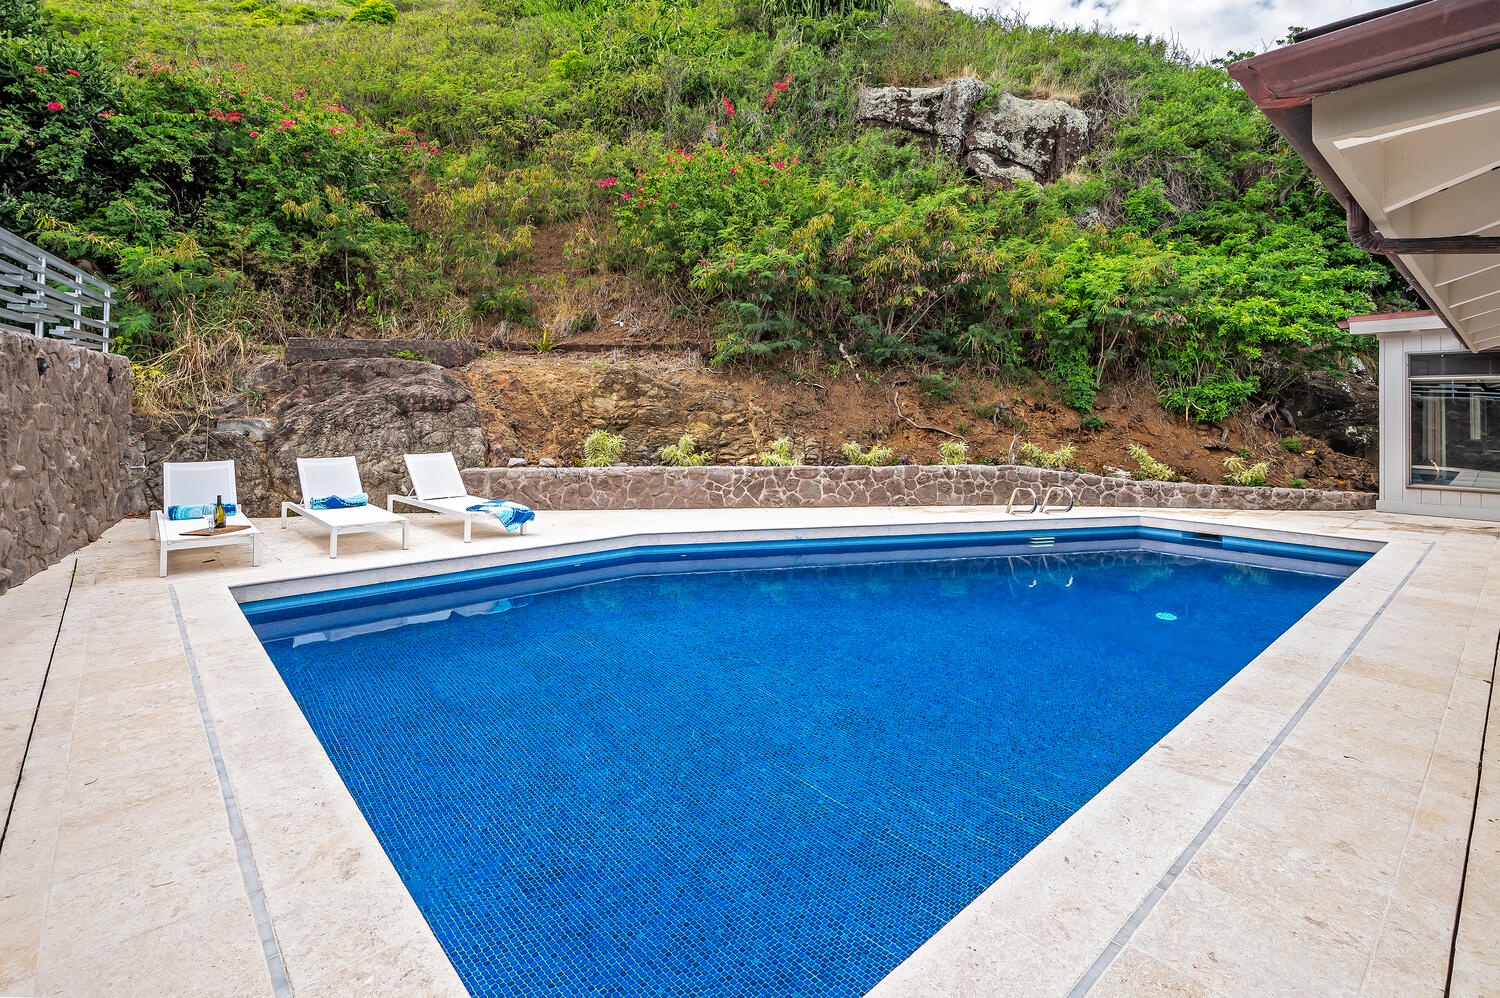 Kailua Vacation Rentals, Hale Lani - Cool off in the private pool